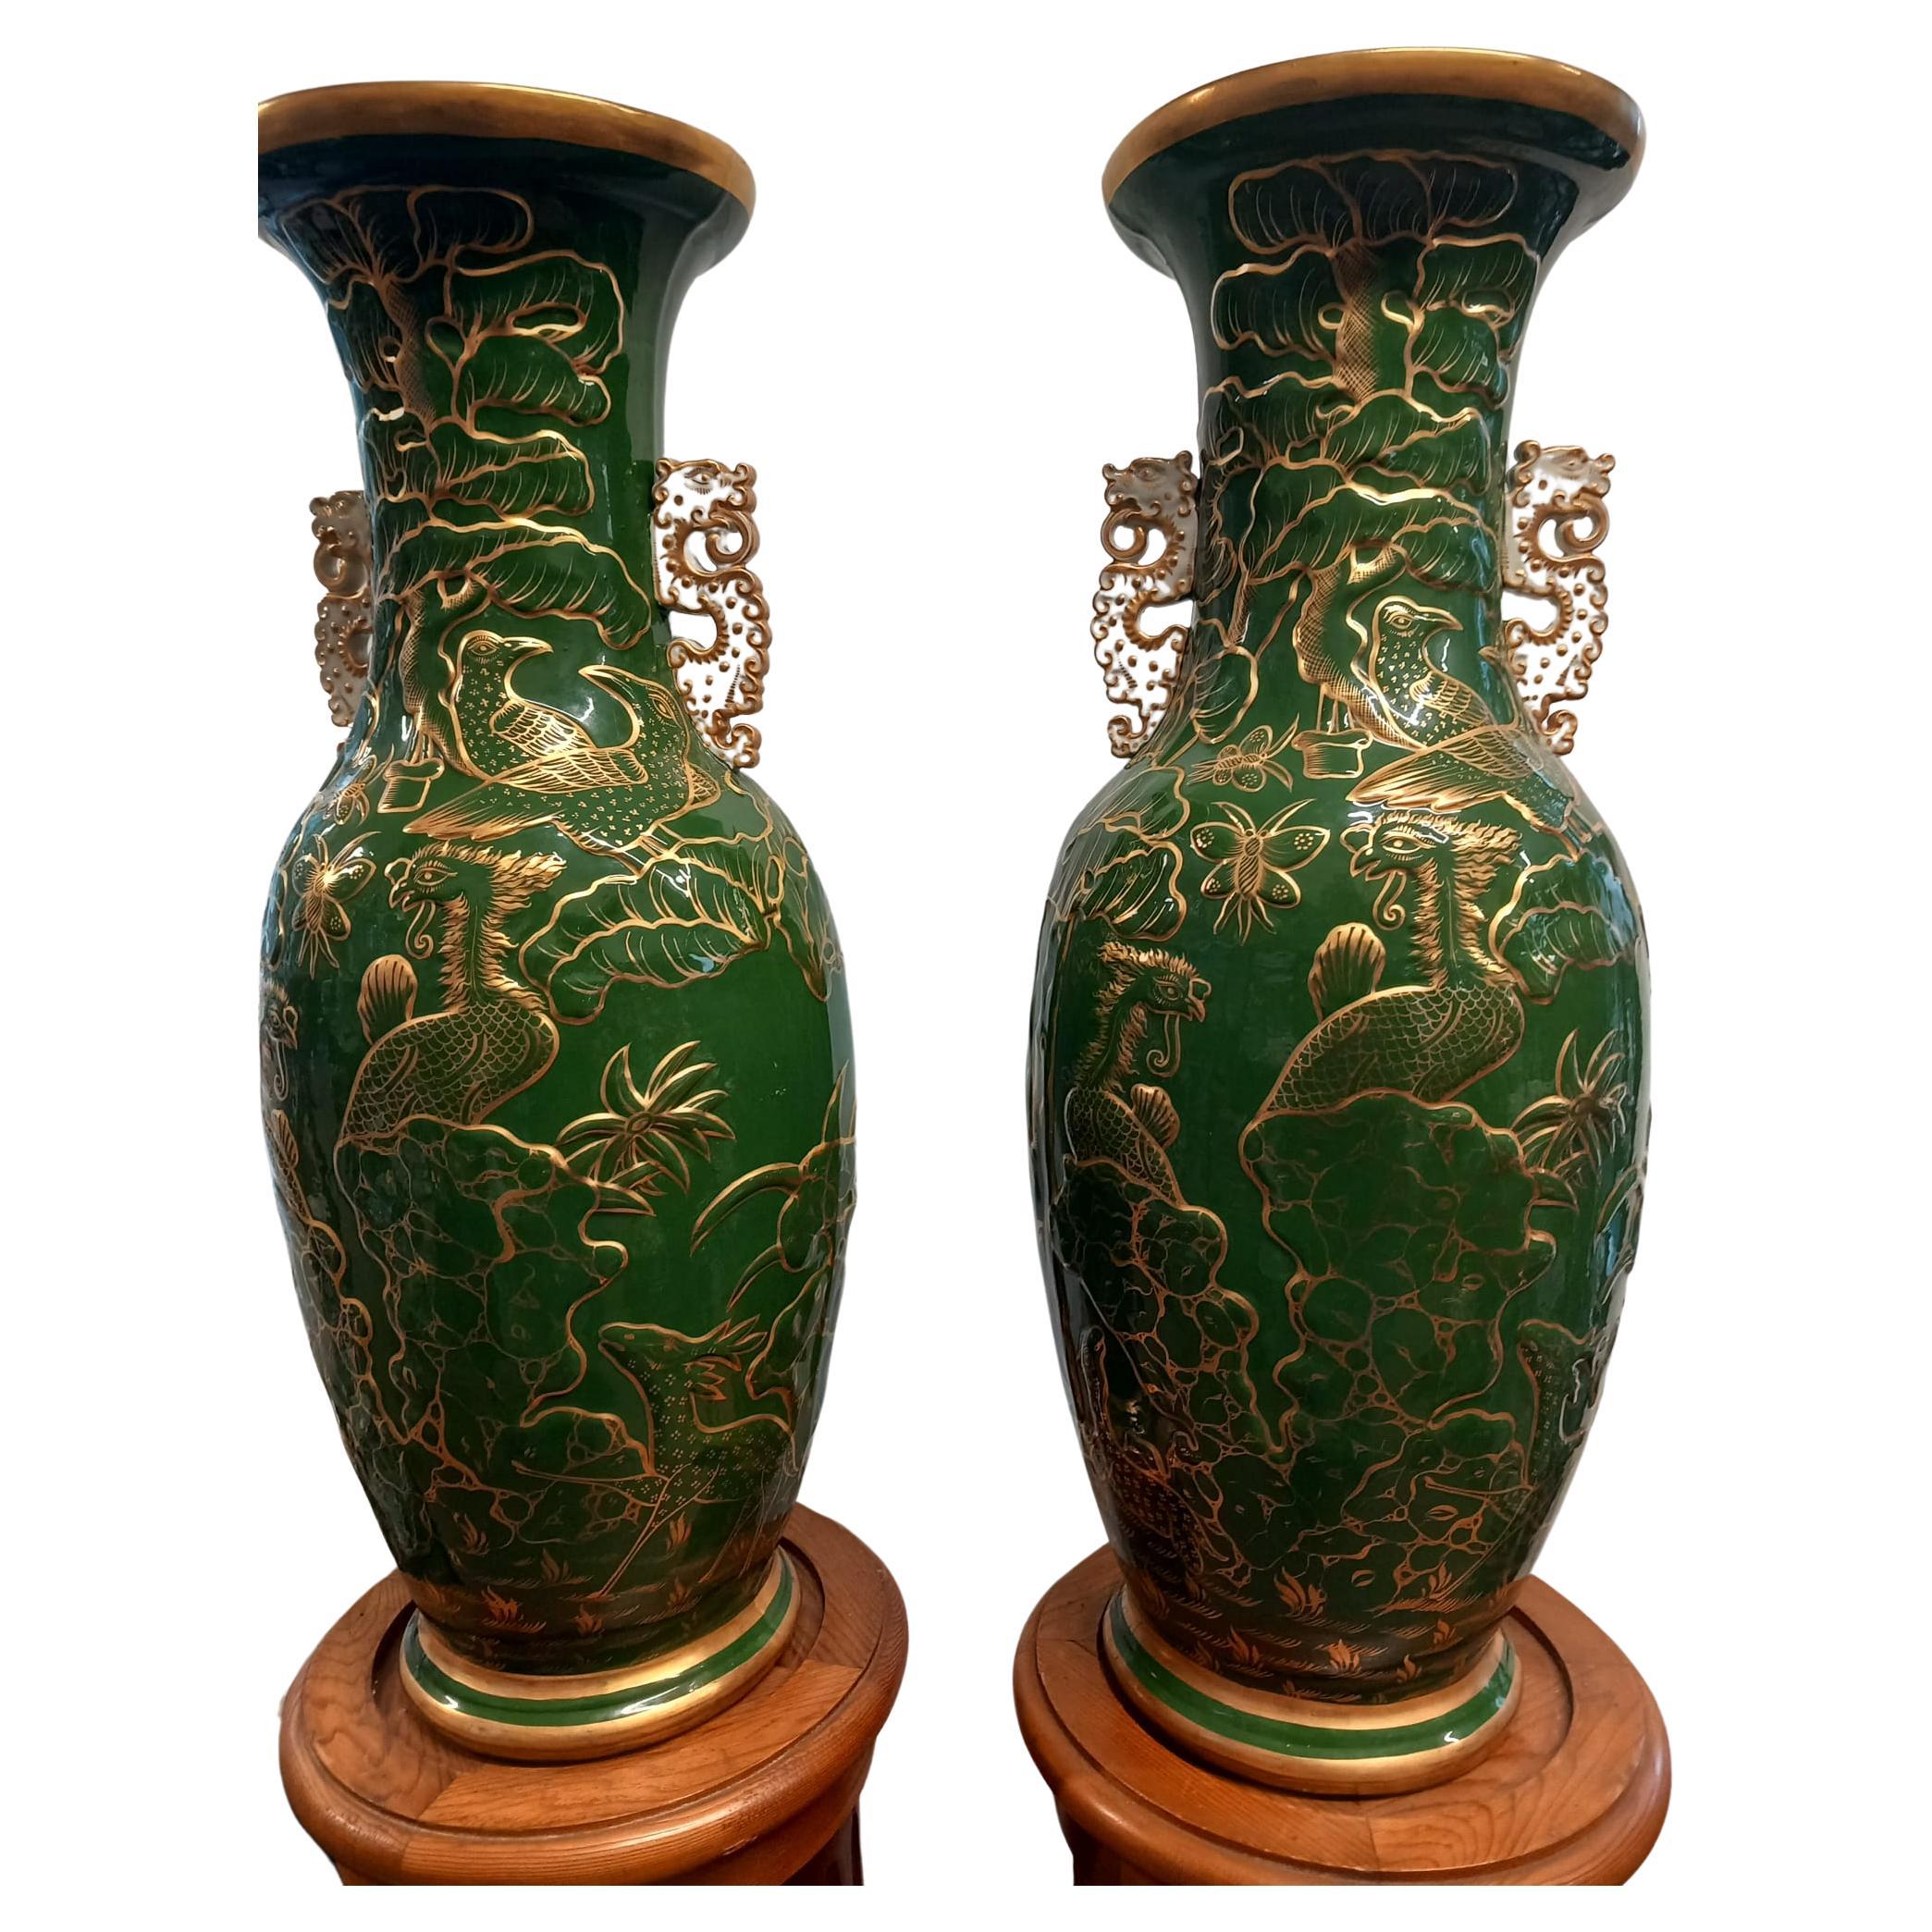 A large pair of English Ironstone Vases